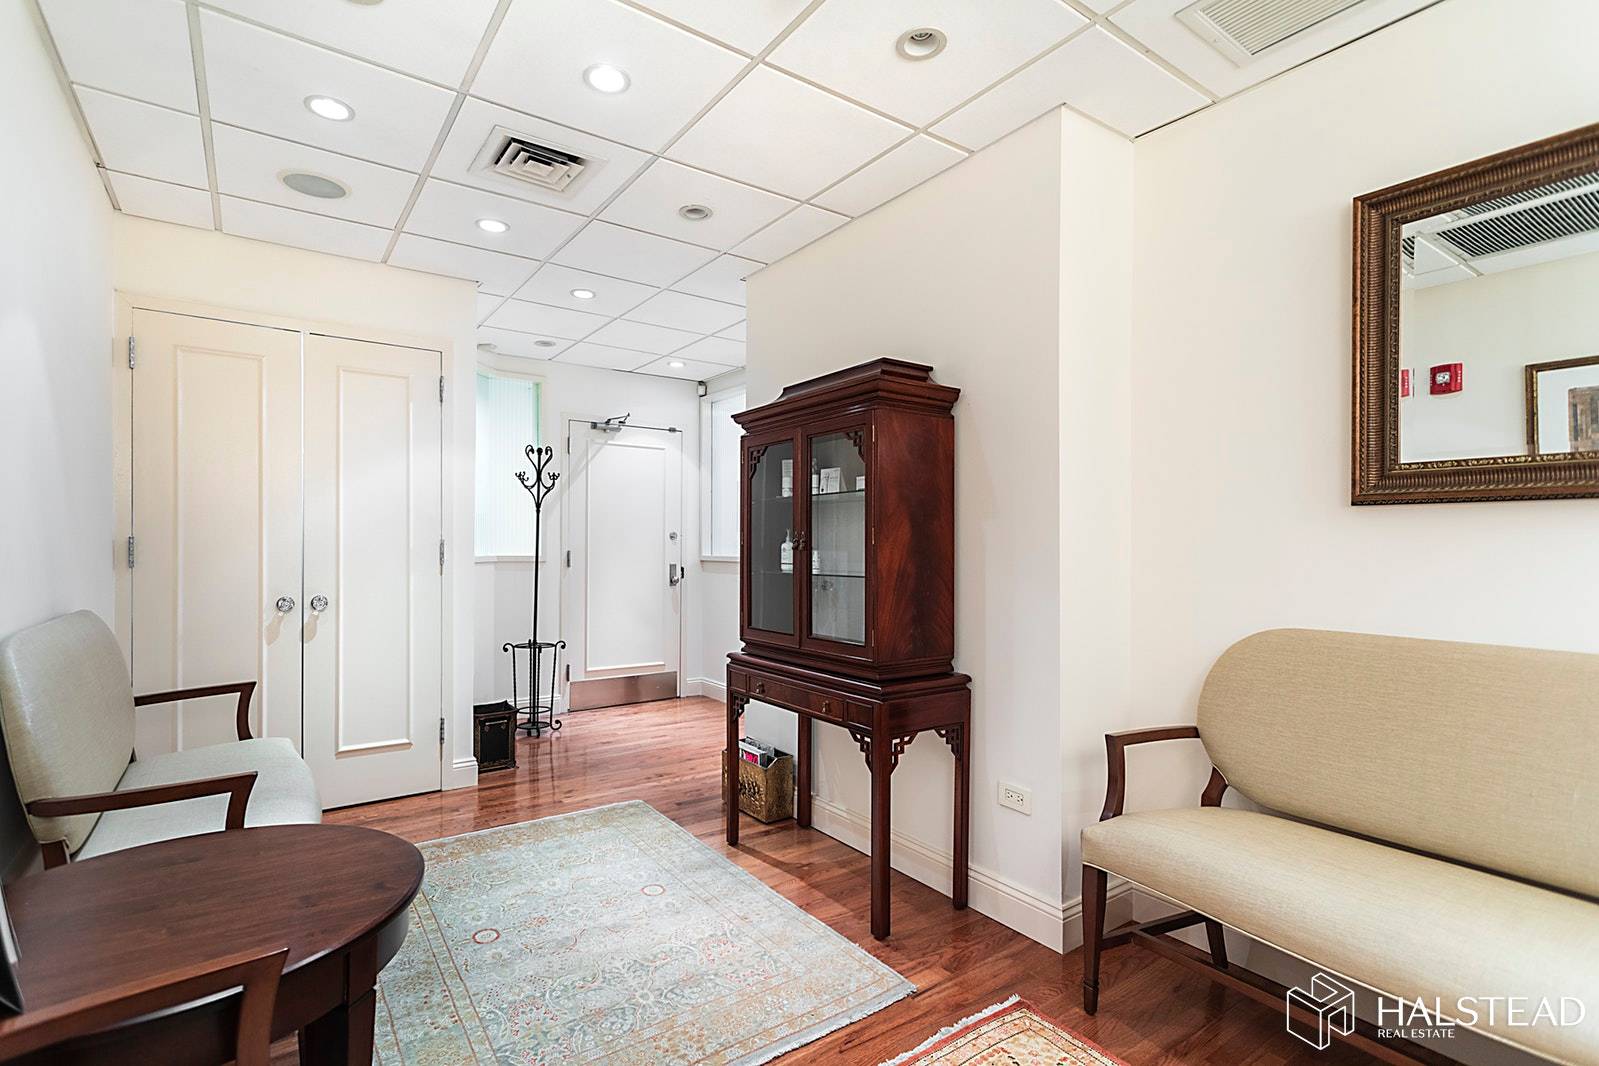 This Madison Ave Medical CONDO shows like a model.